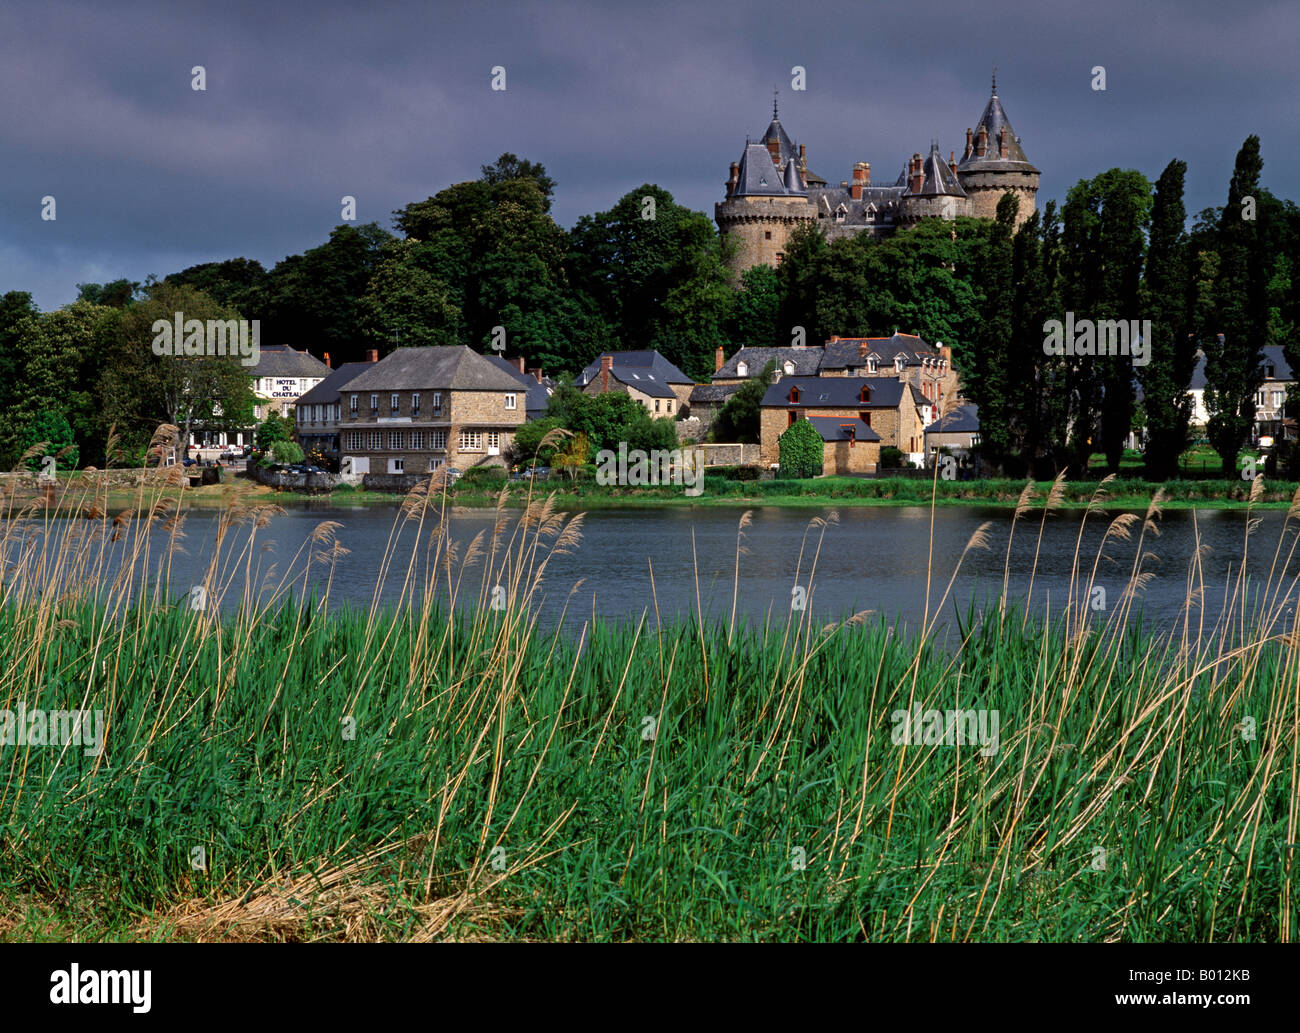 France, Brittany, Combourg. Chateau Combourg. The Chateau still belongs to the family of the famous writer 'Chateaubriand' Stock Photo